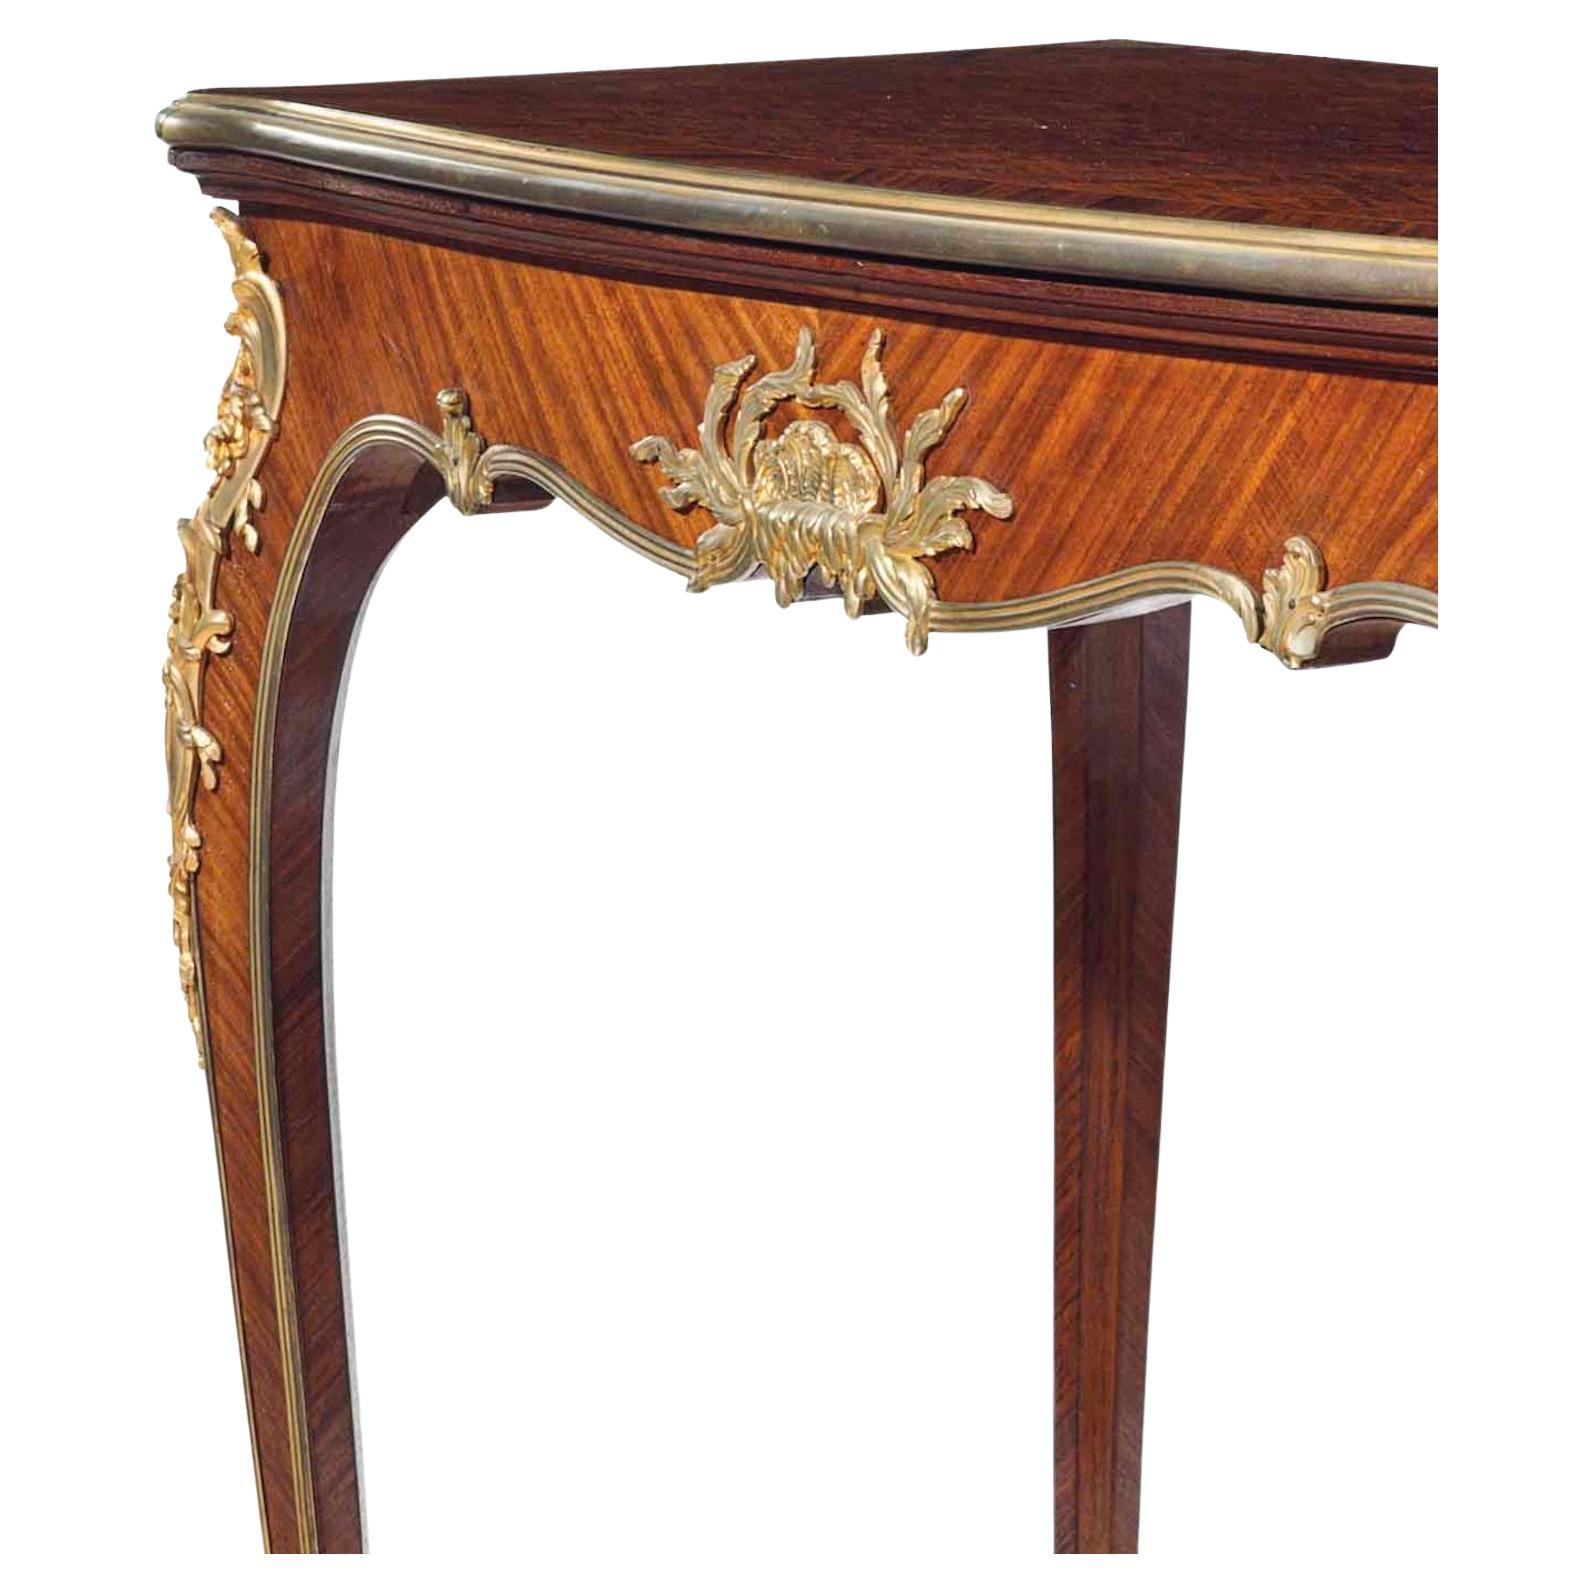 Item: a French ormolu-mounted Kingwood and satin parquetry games table author: Fransois Linke
Origin: Paris, France
Special features: the left front angle mount signed F. LINKE, the reverse of the mounts variously numbered period: late 19th/early